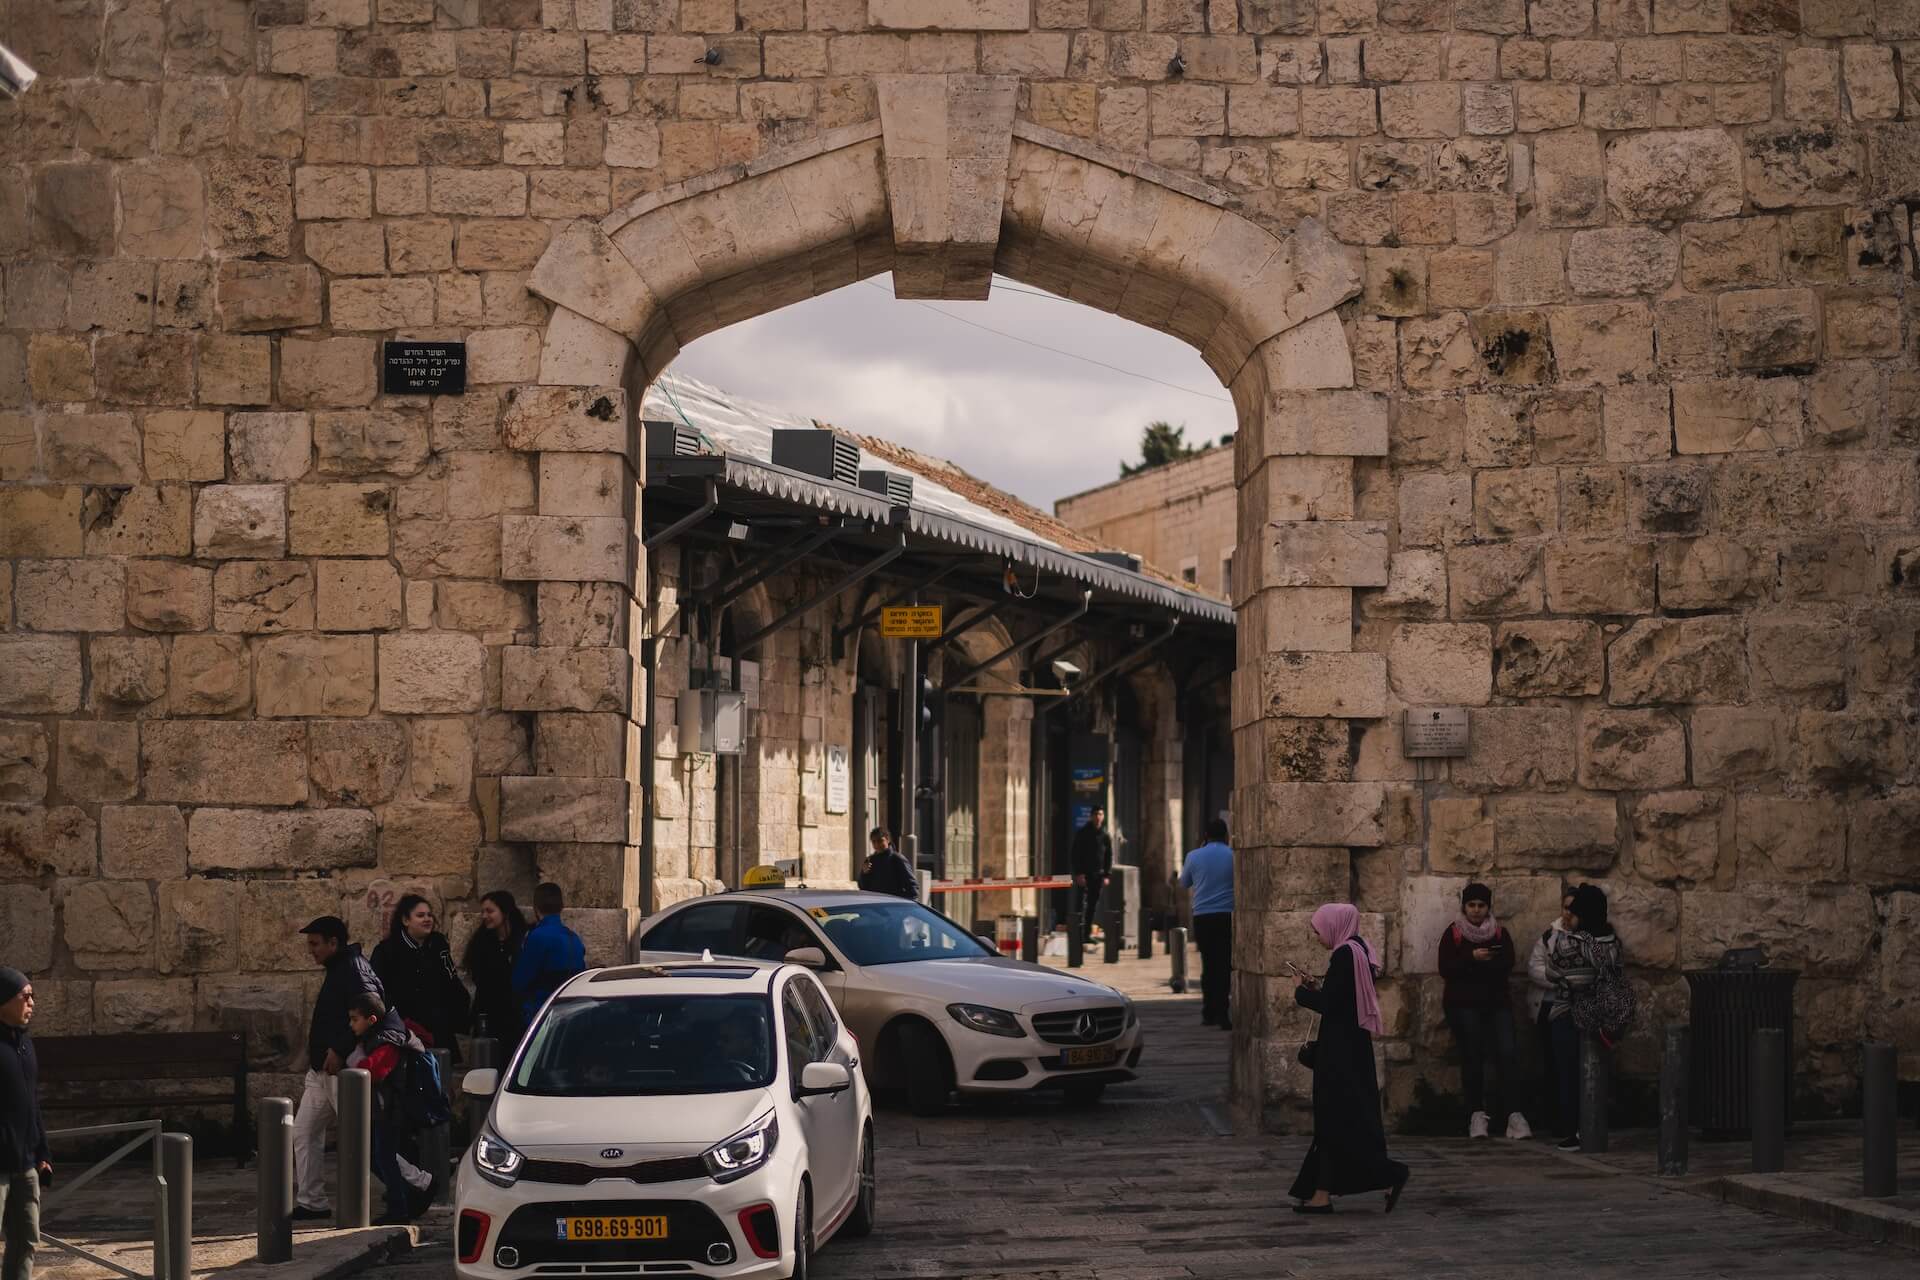 Travelling in Israel- An Israeli Taxi stands at a gate in Jerusalem